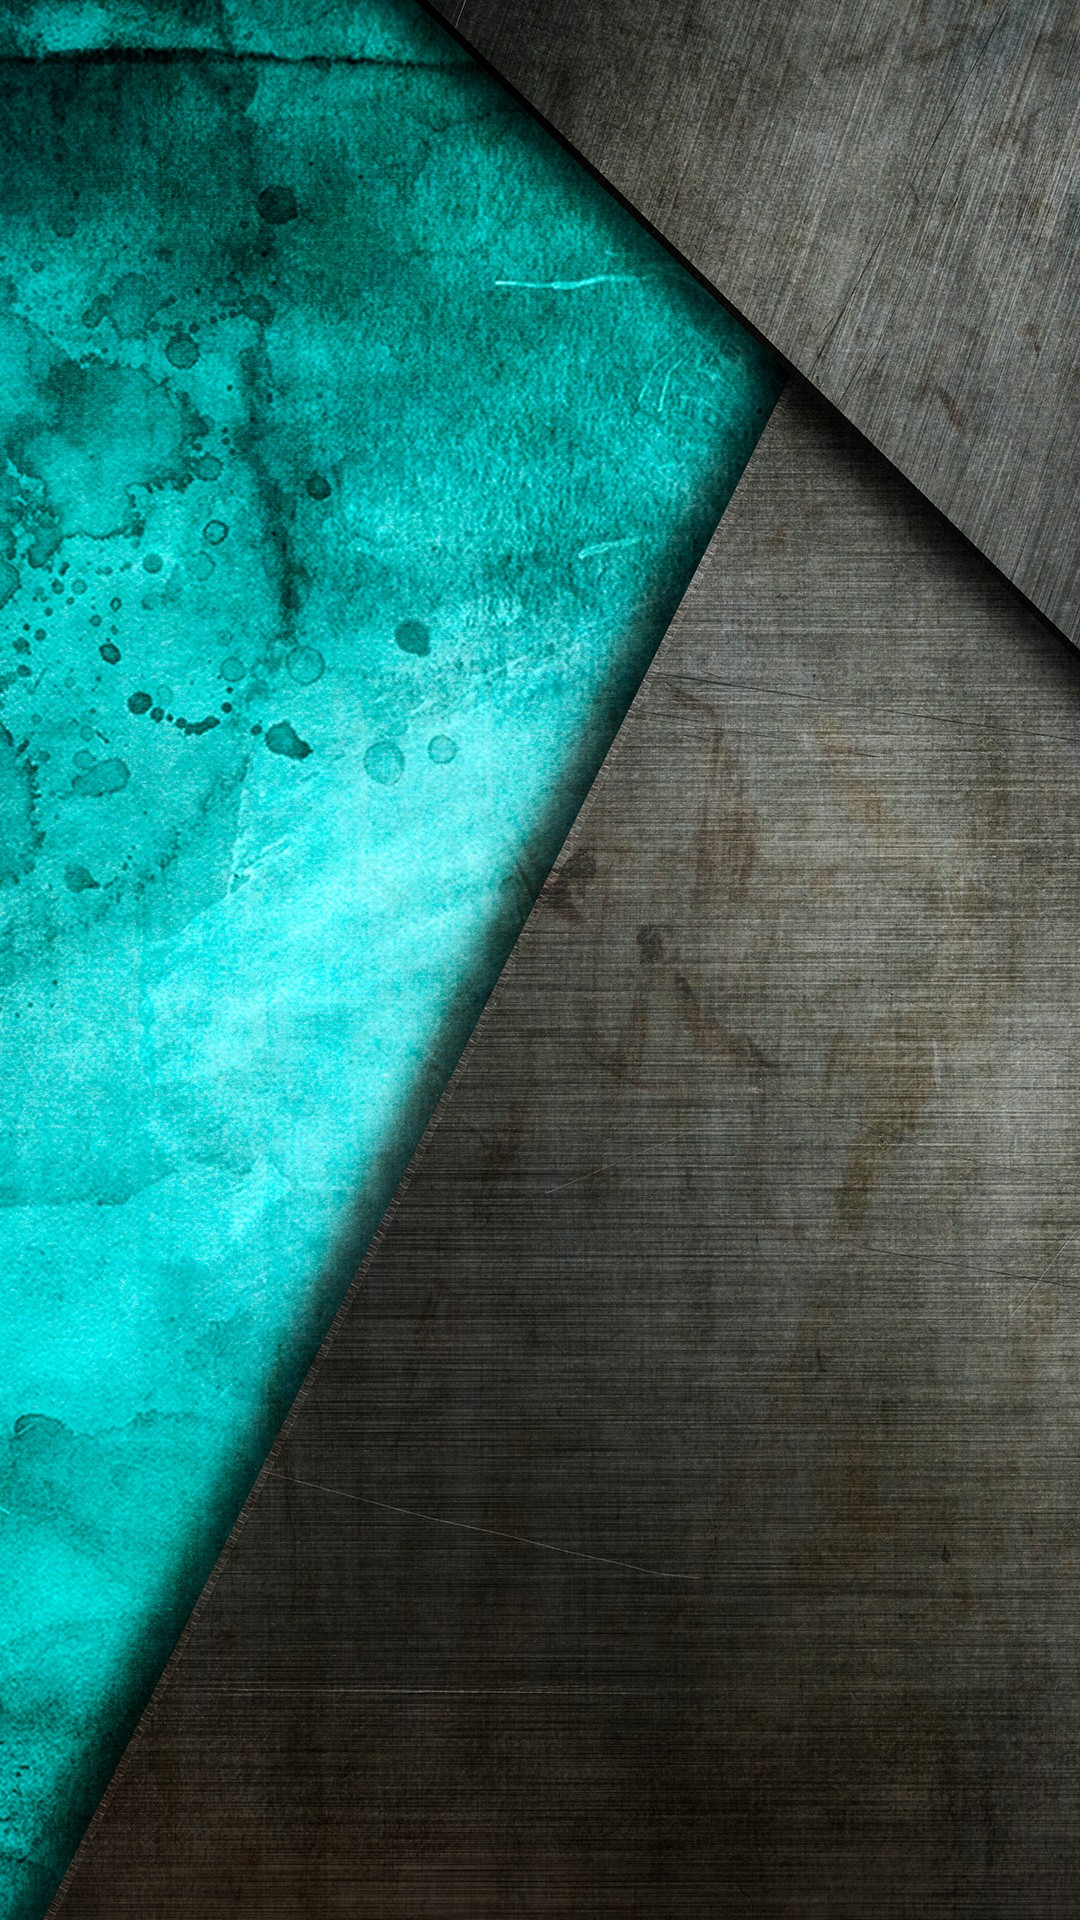 Abstract Wallpaper Images - Free Download on Freepik